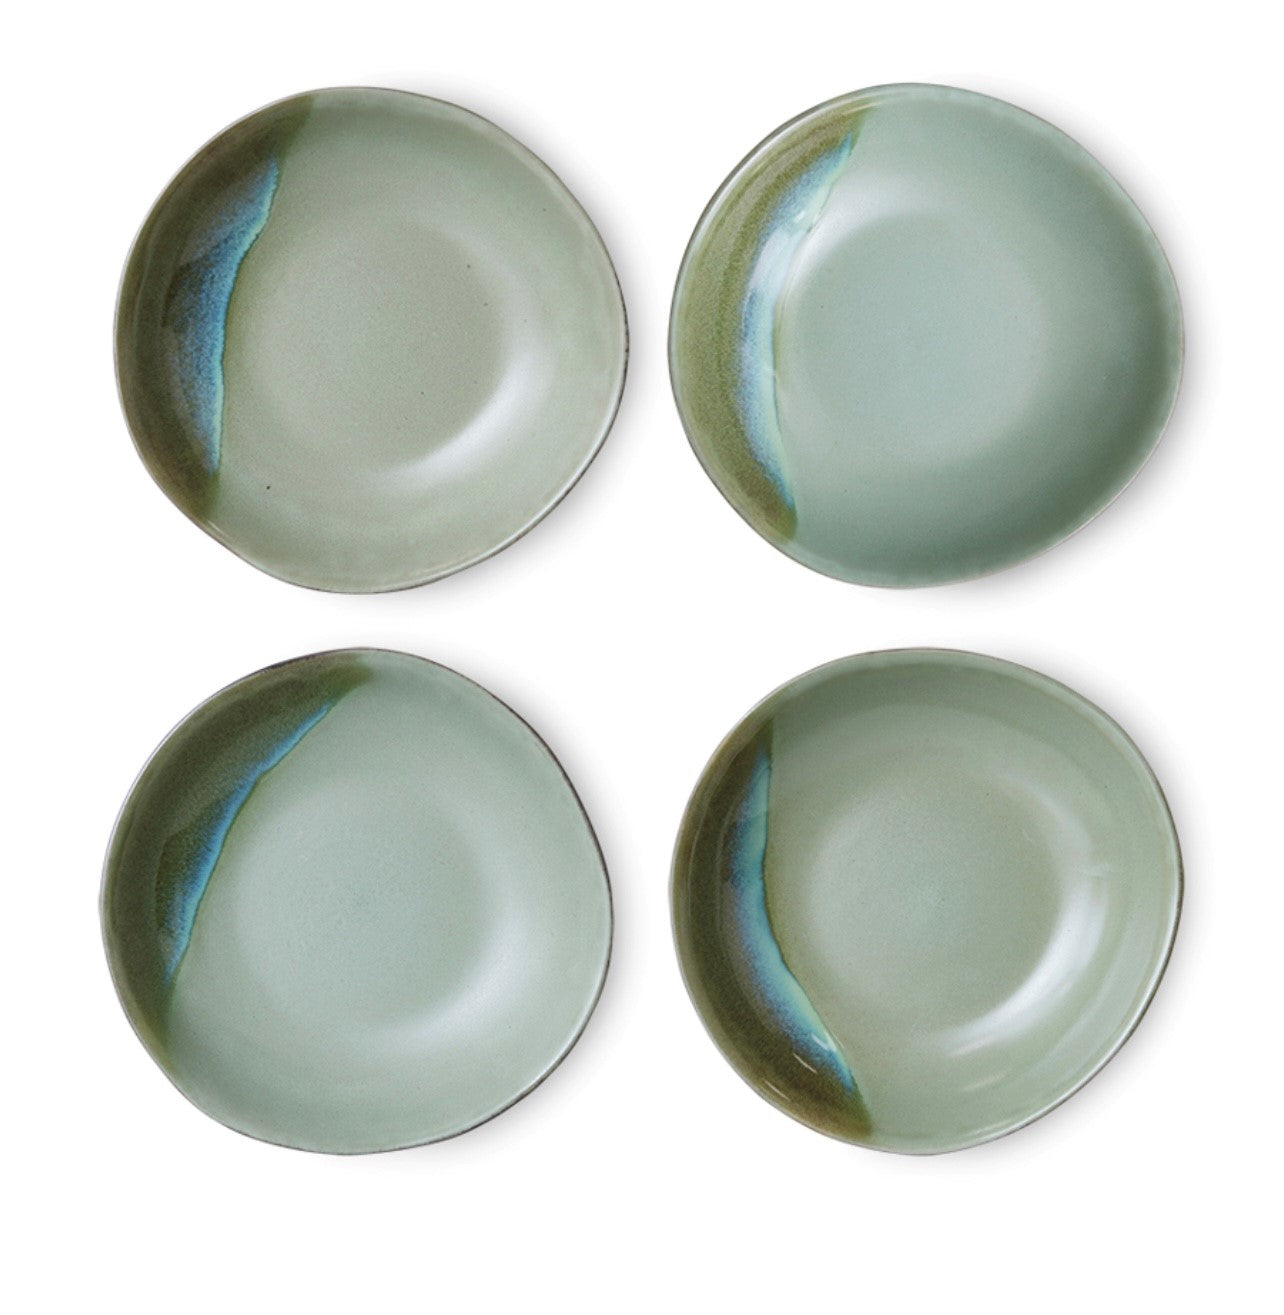 4 stoneware curry bowls in ray green hues